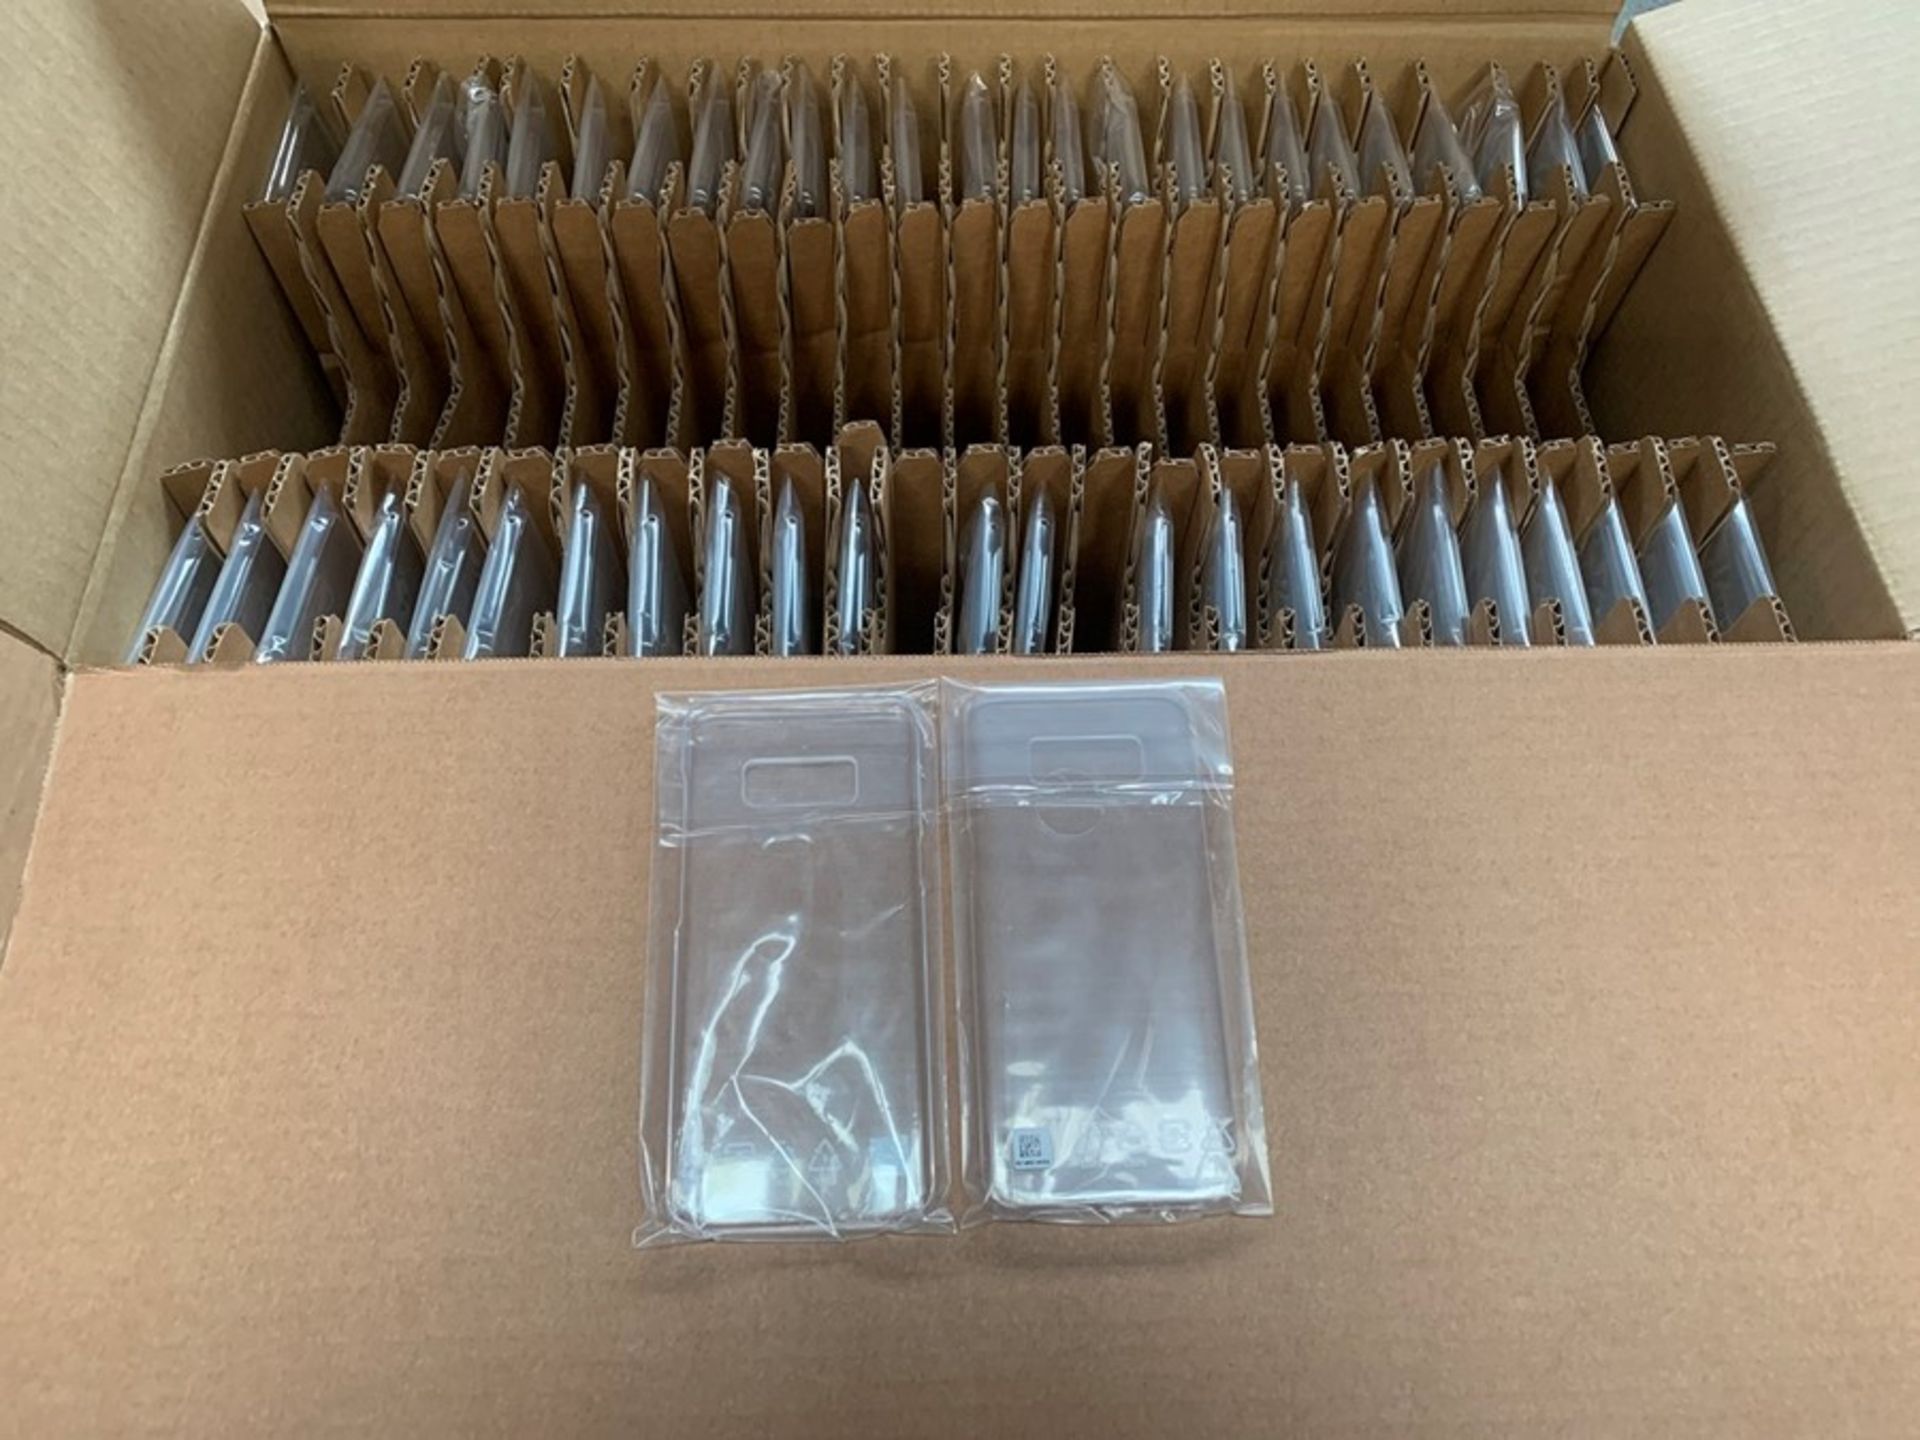 1 LOT TO CONTAIN 50 SAMSUNG S8 CLEAR PHONE CASES / RRP £149.50 (PUBLIC VIEWING AVAILABLE)